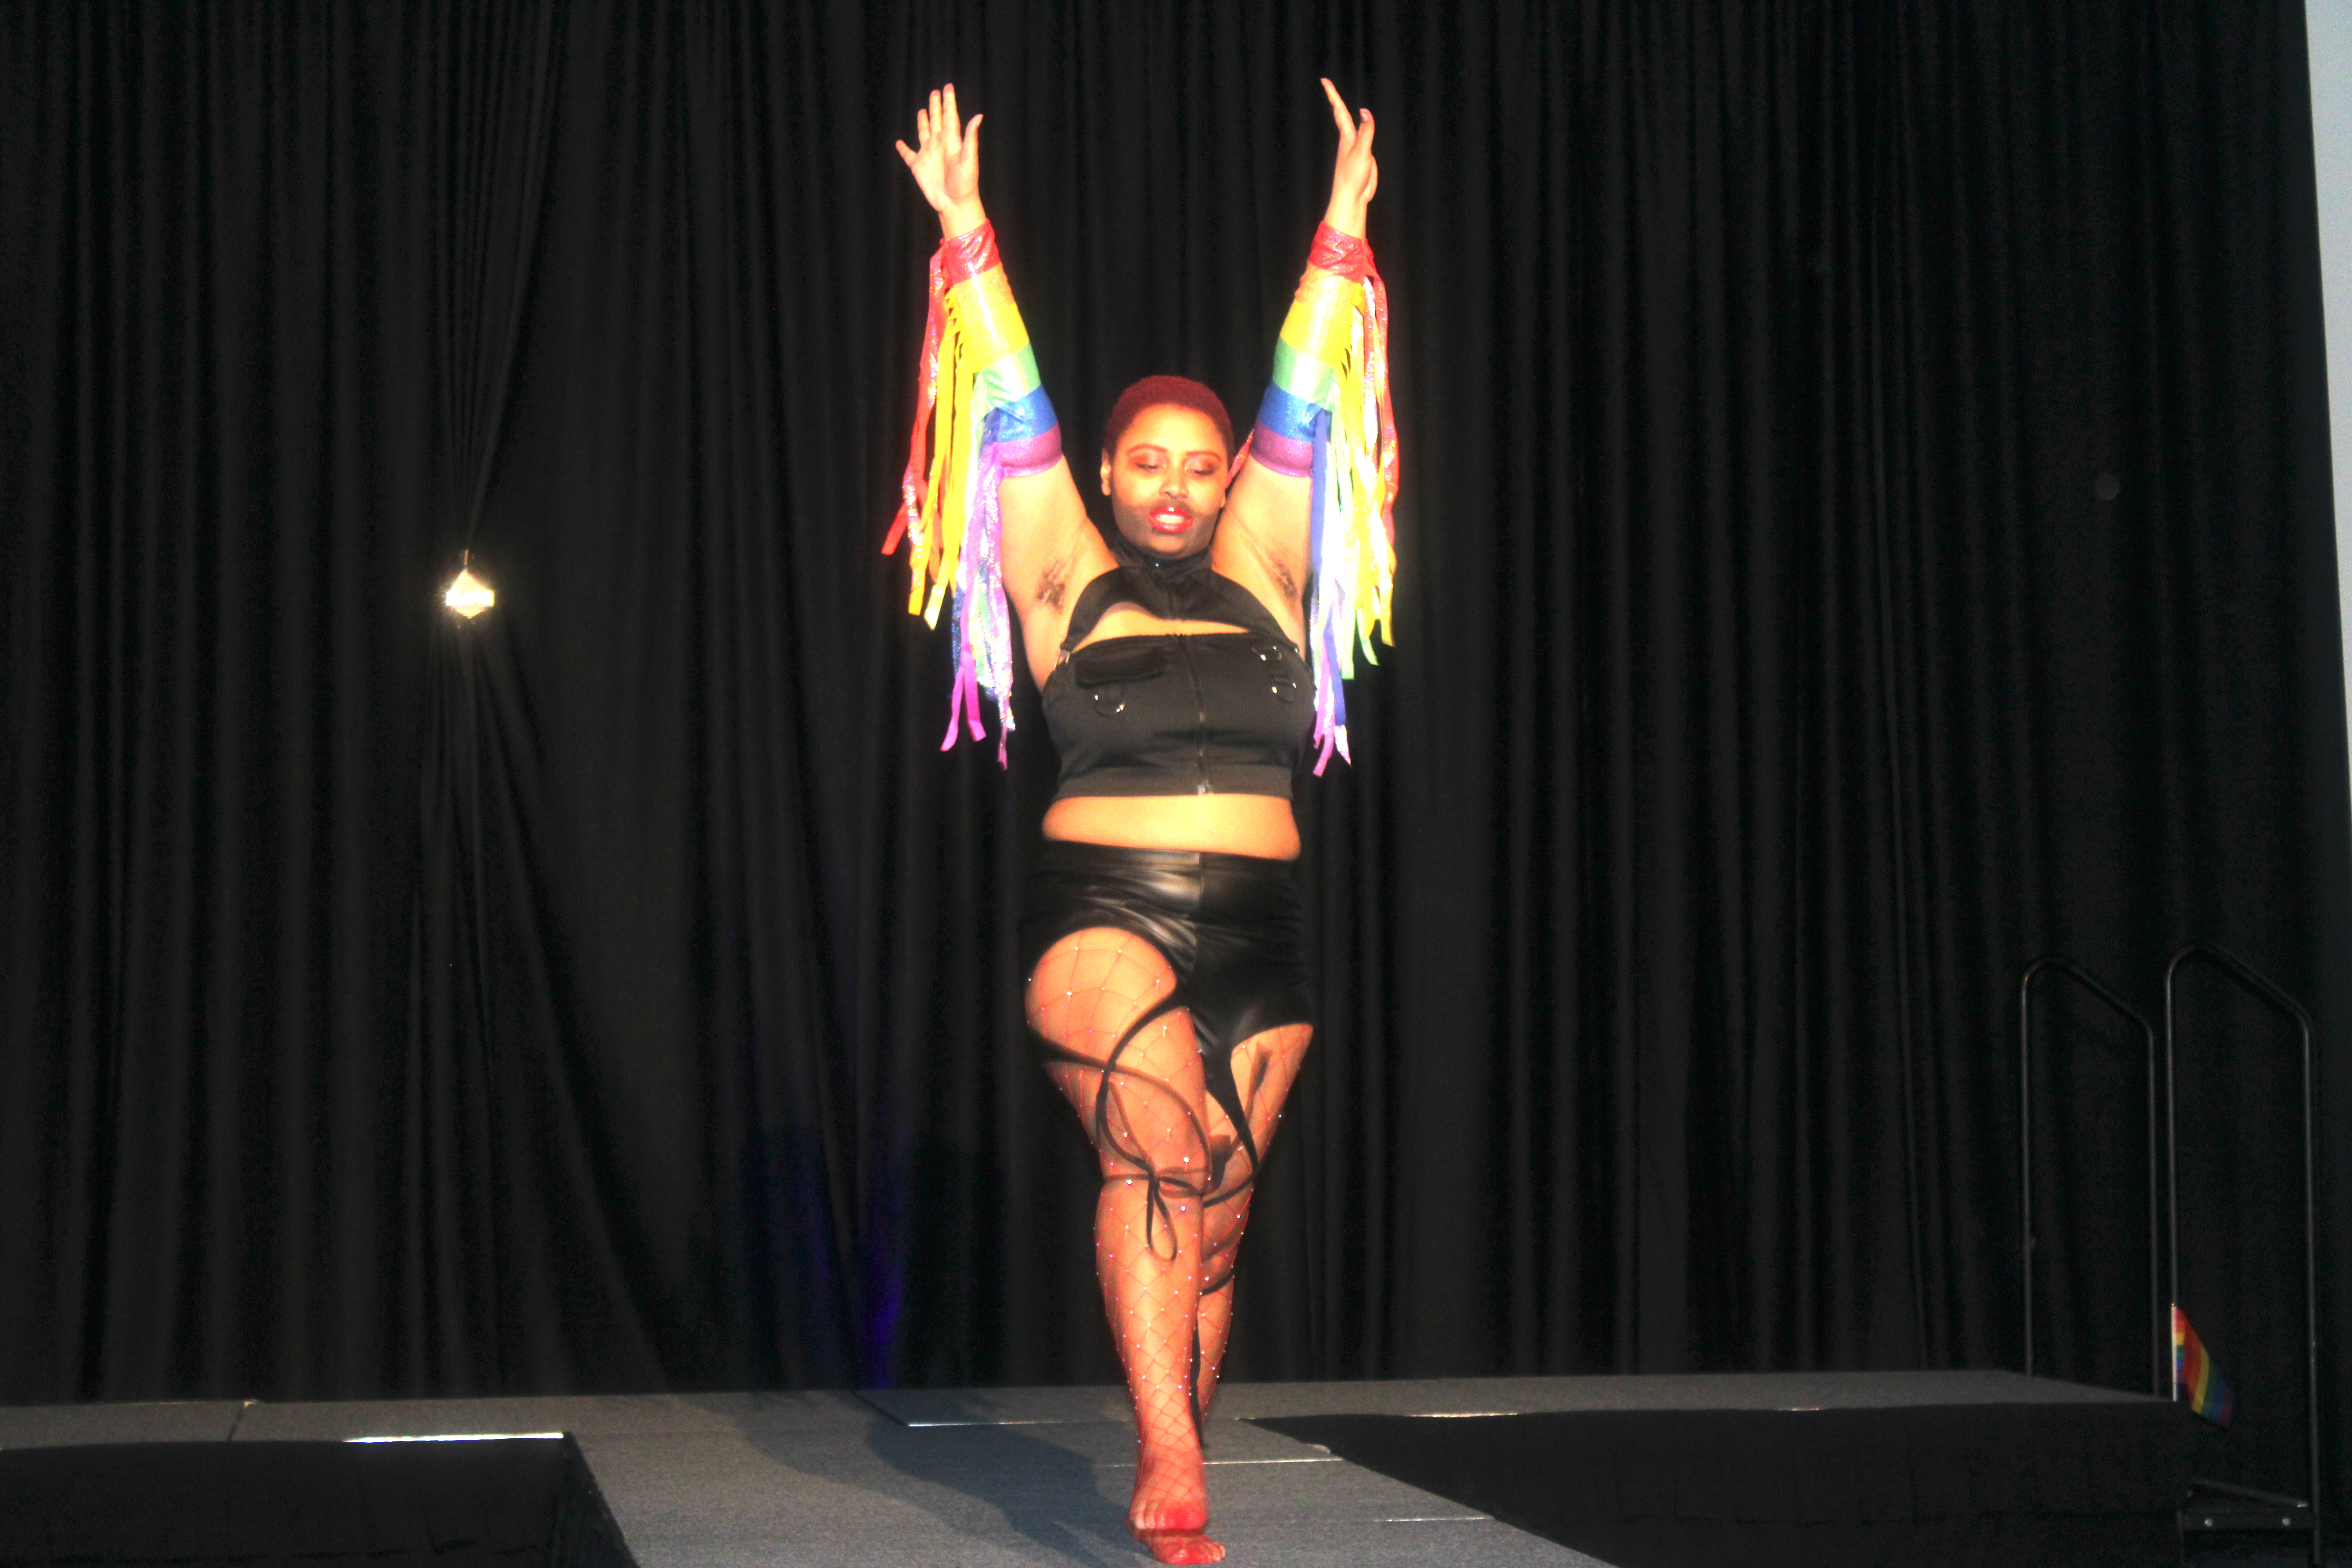 Phoenix performing at the SAGA/PRIDE drag show at UM-Dearborn, March 16, 2023. Photo by Ashley Davis.